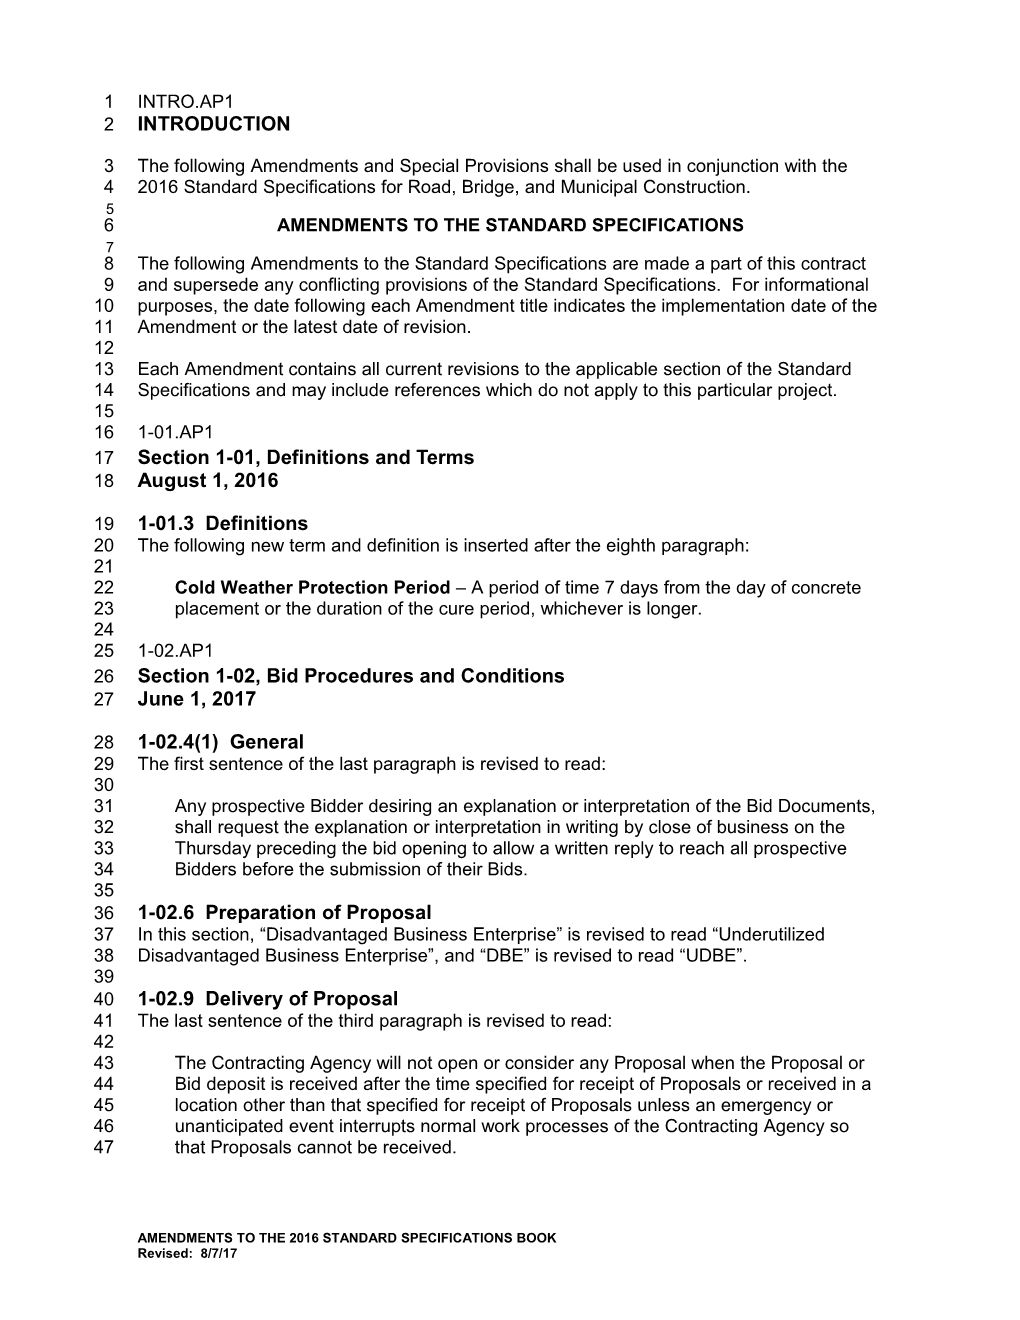 Amendments to the Standard Specifications s1